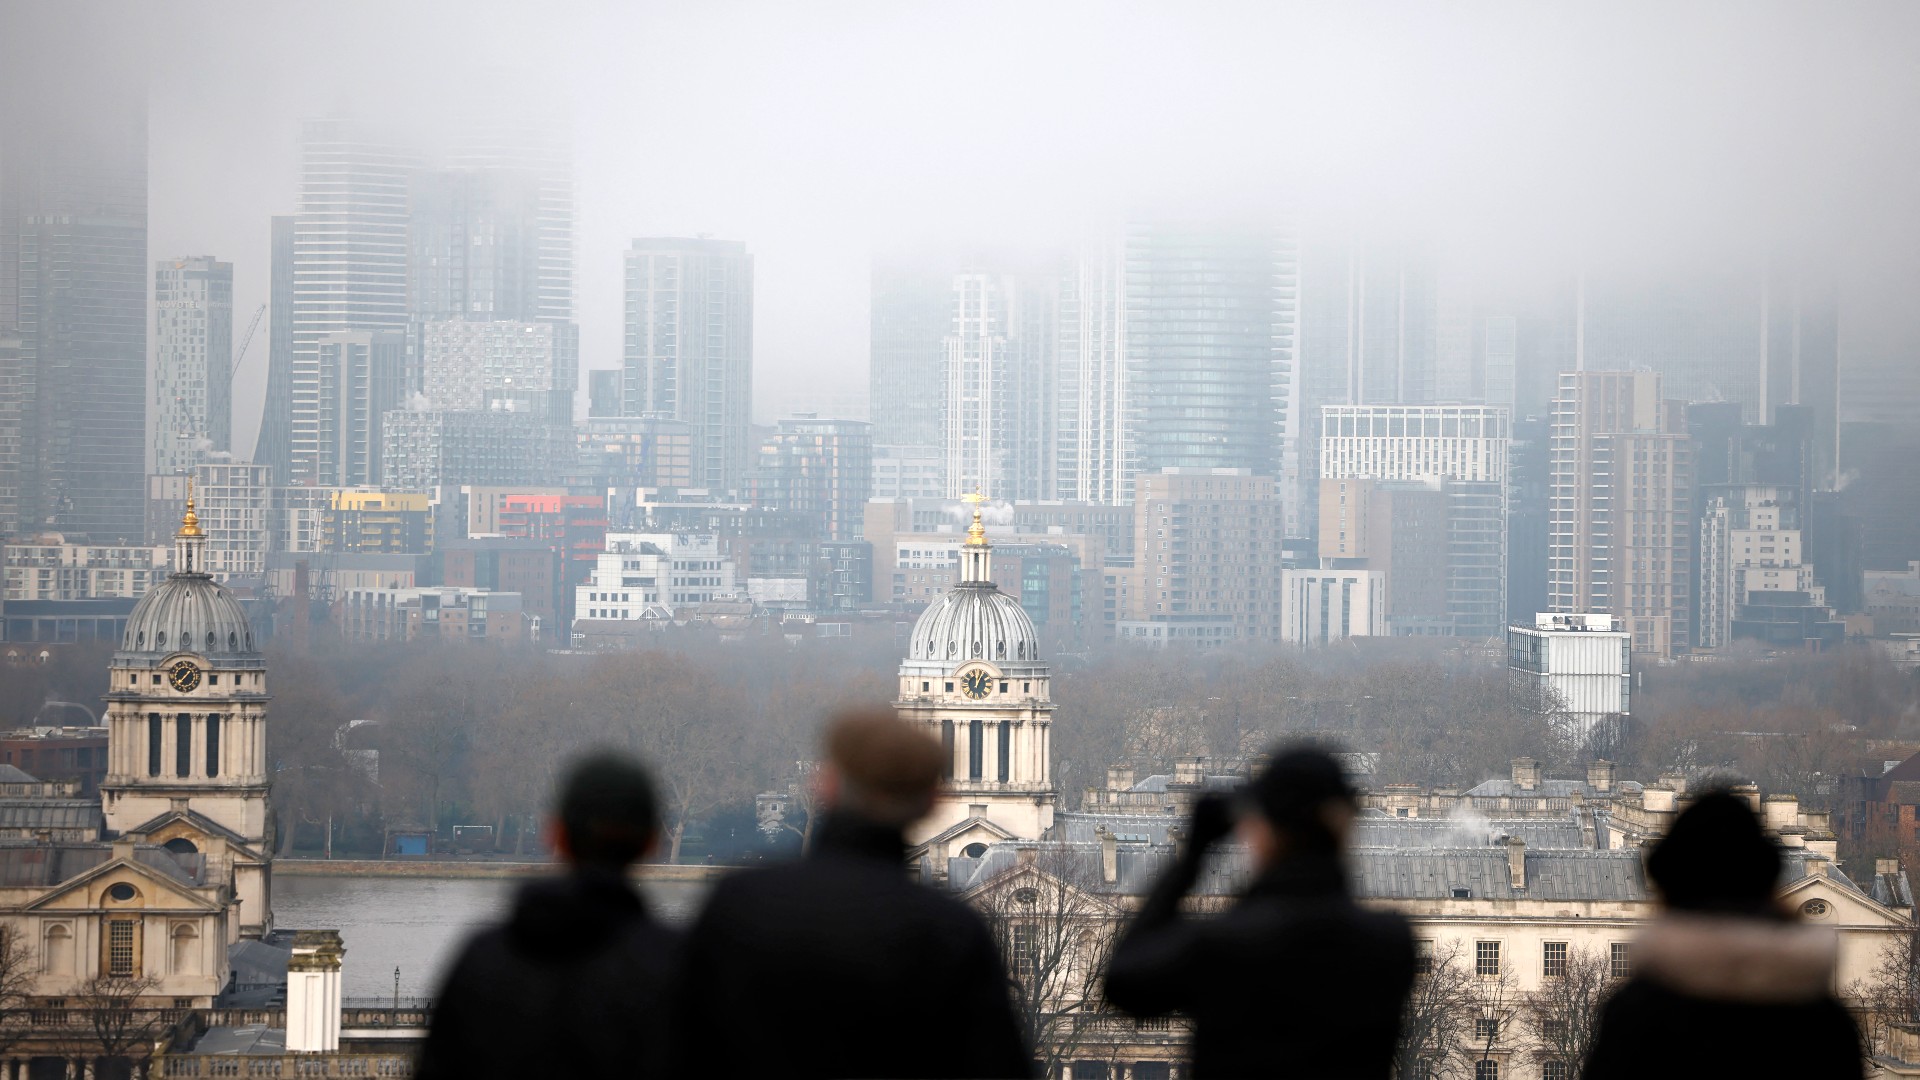 People walk in Greenwich Park with the office buildings of the Canary Wharf financial district in the background in London on the bank holiday, December 28, 2020